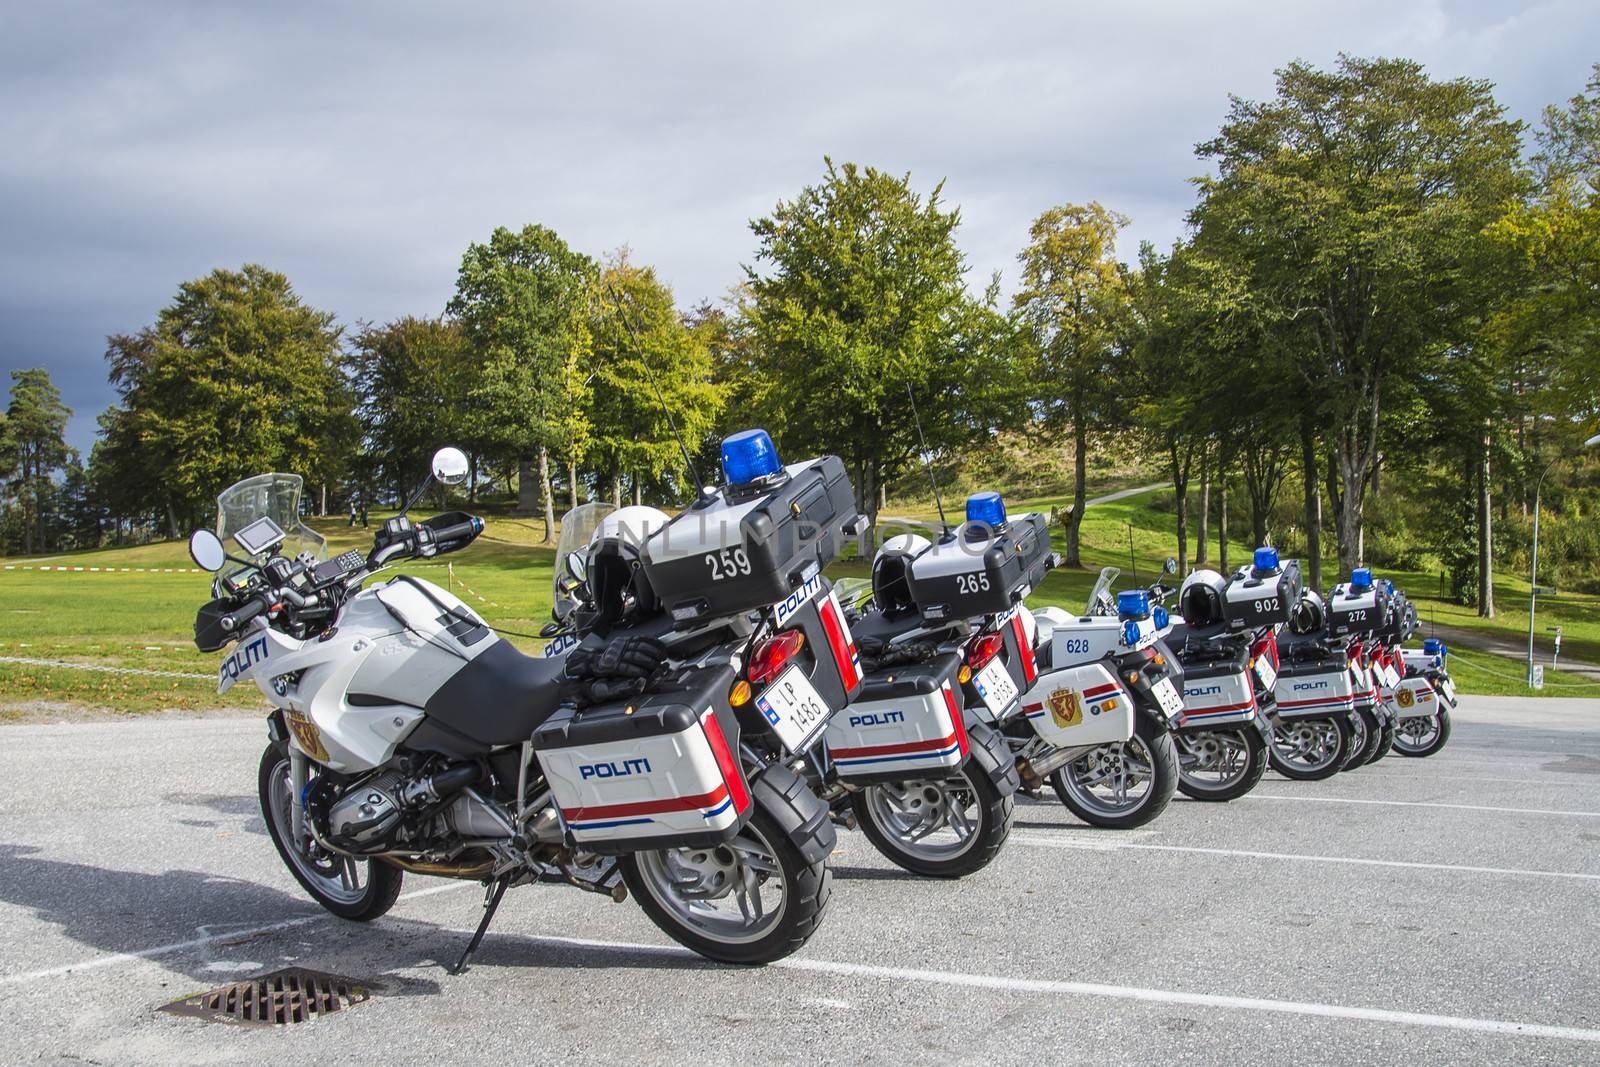 police motorcycles by steirus